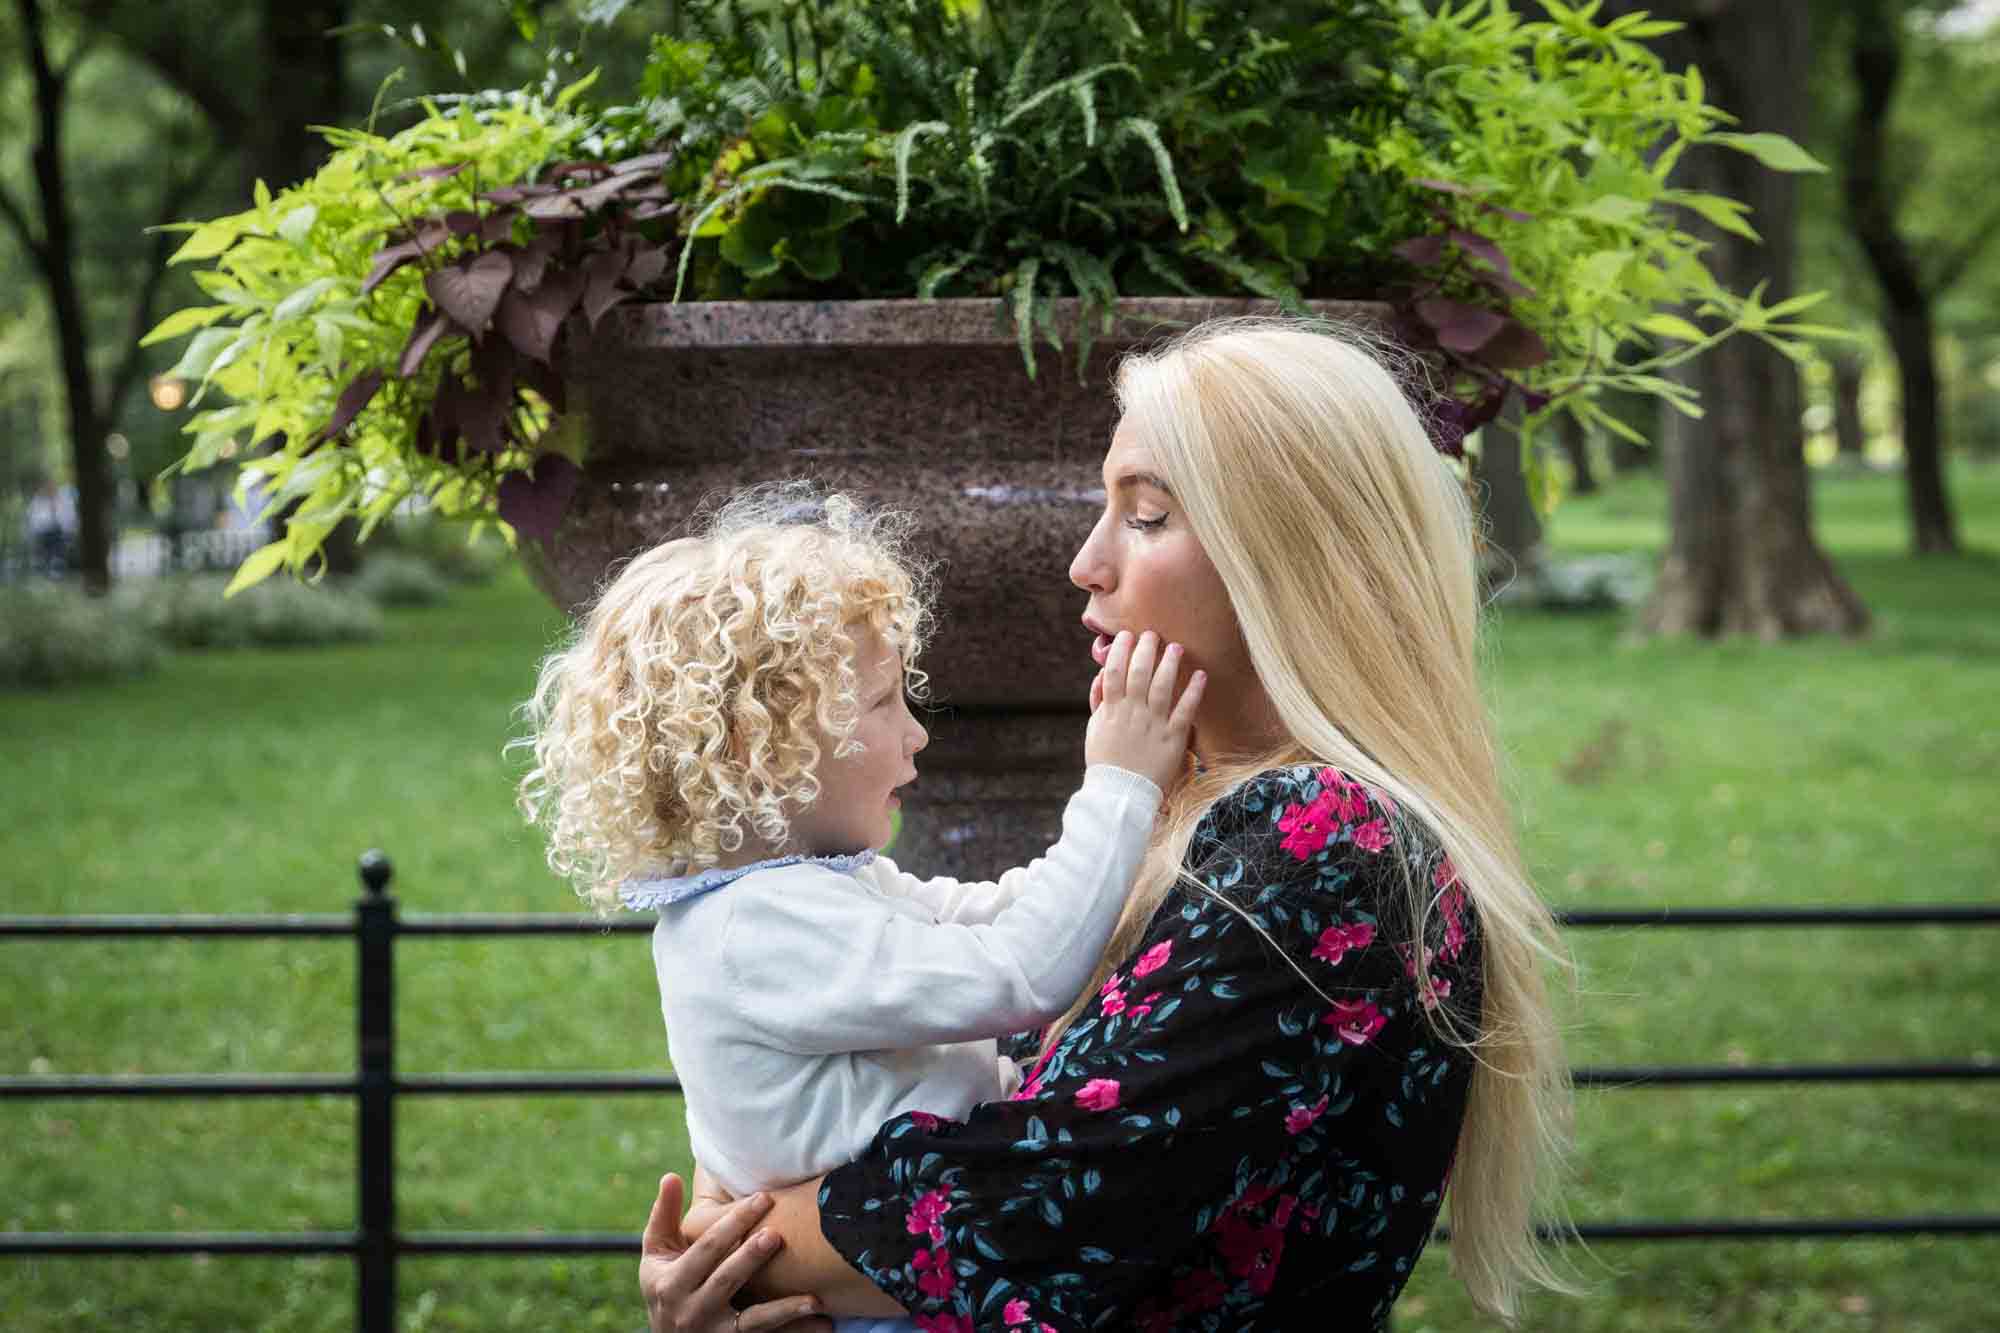 Little girl touching mother's face in front of planter for an article on NYC family portrait tips for tourists